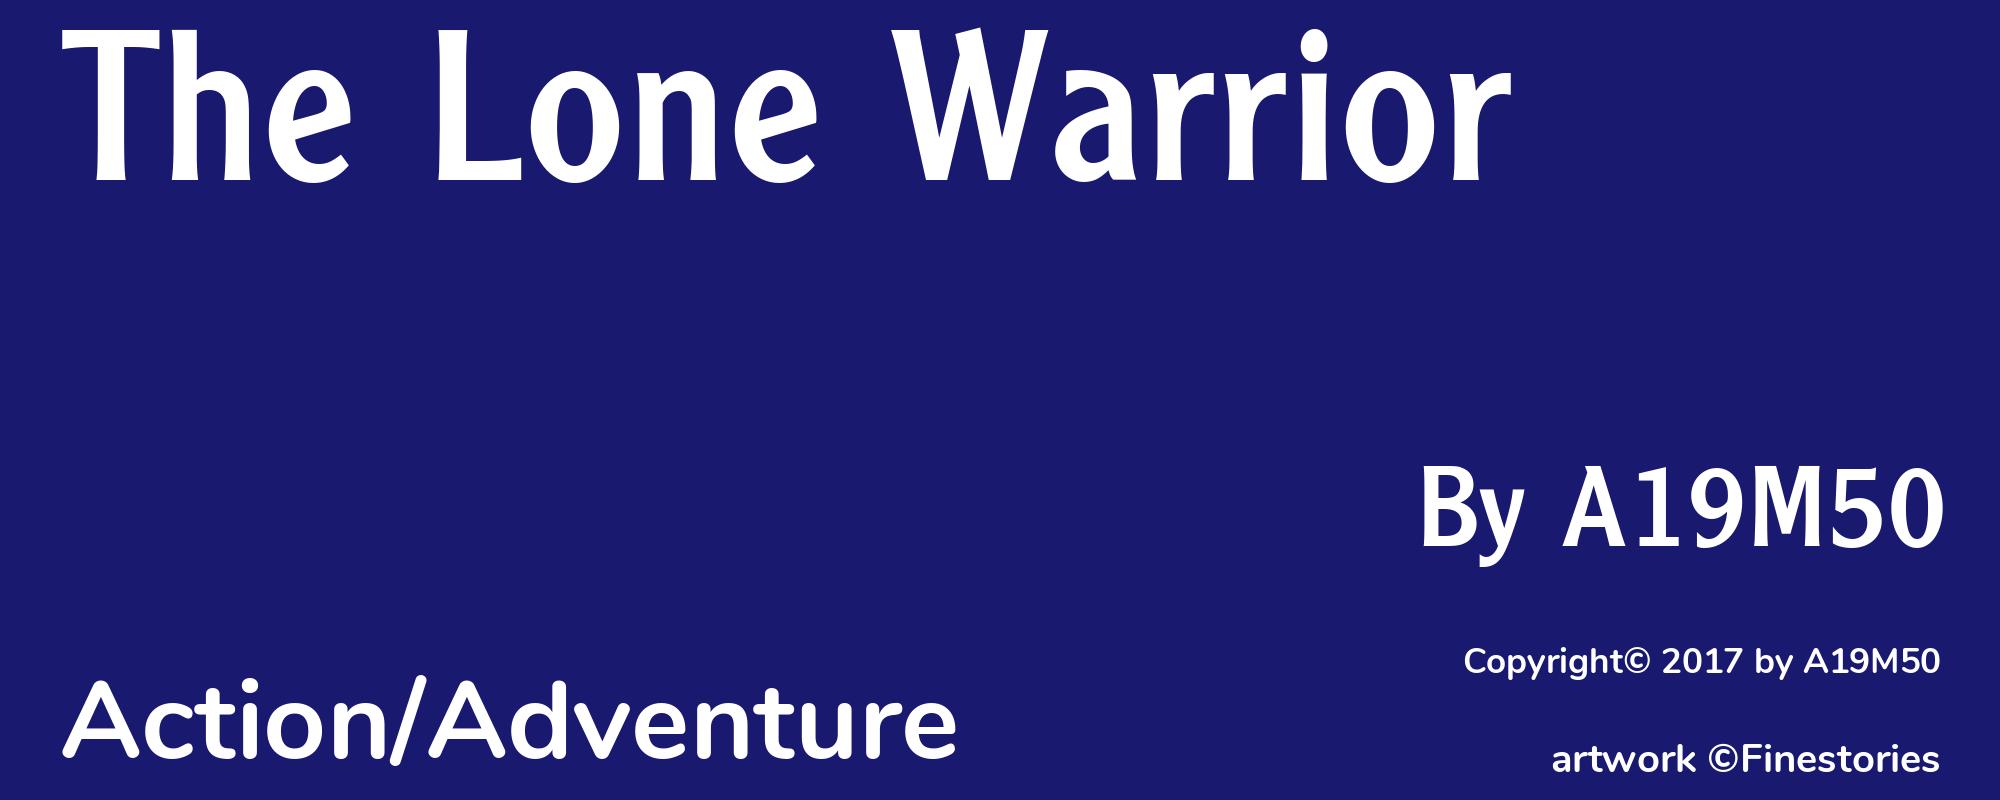 The Lone Warrior - Cover